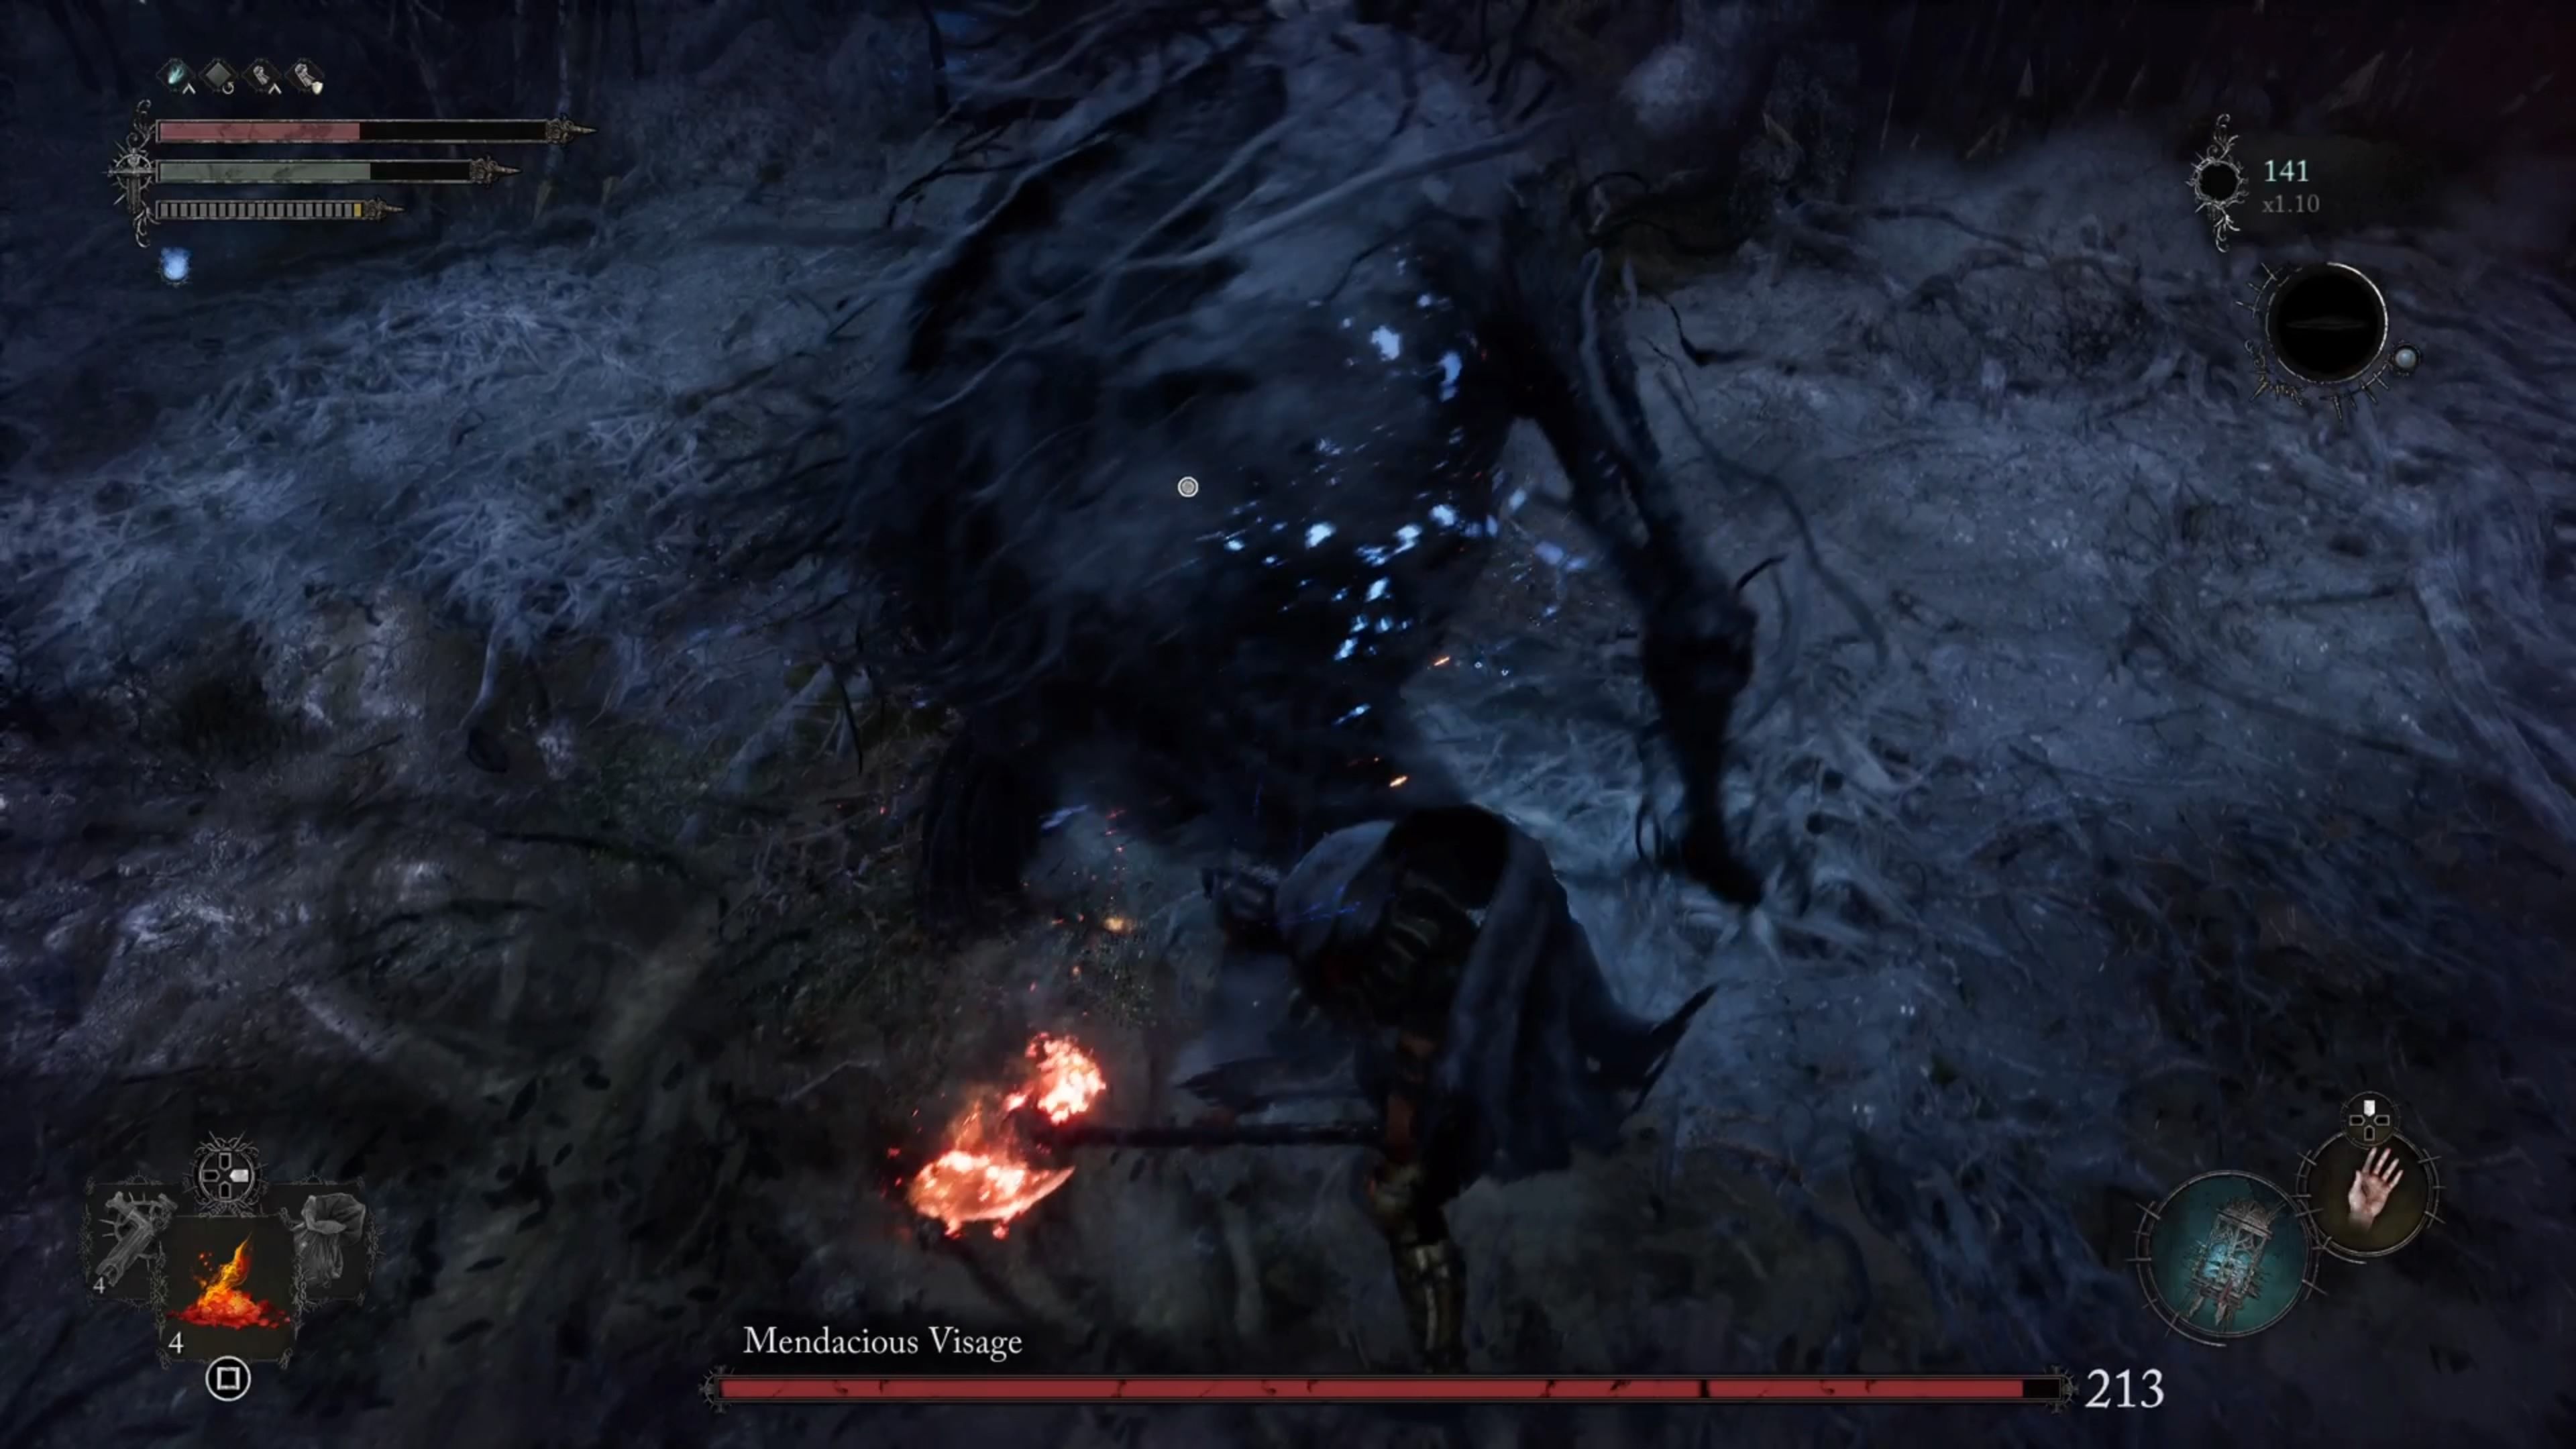 attacking Mendacious Visage Boss from the back in Lords of the Fallen